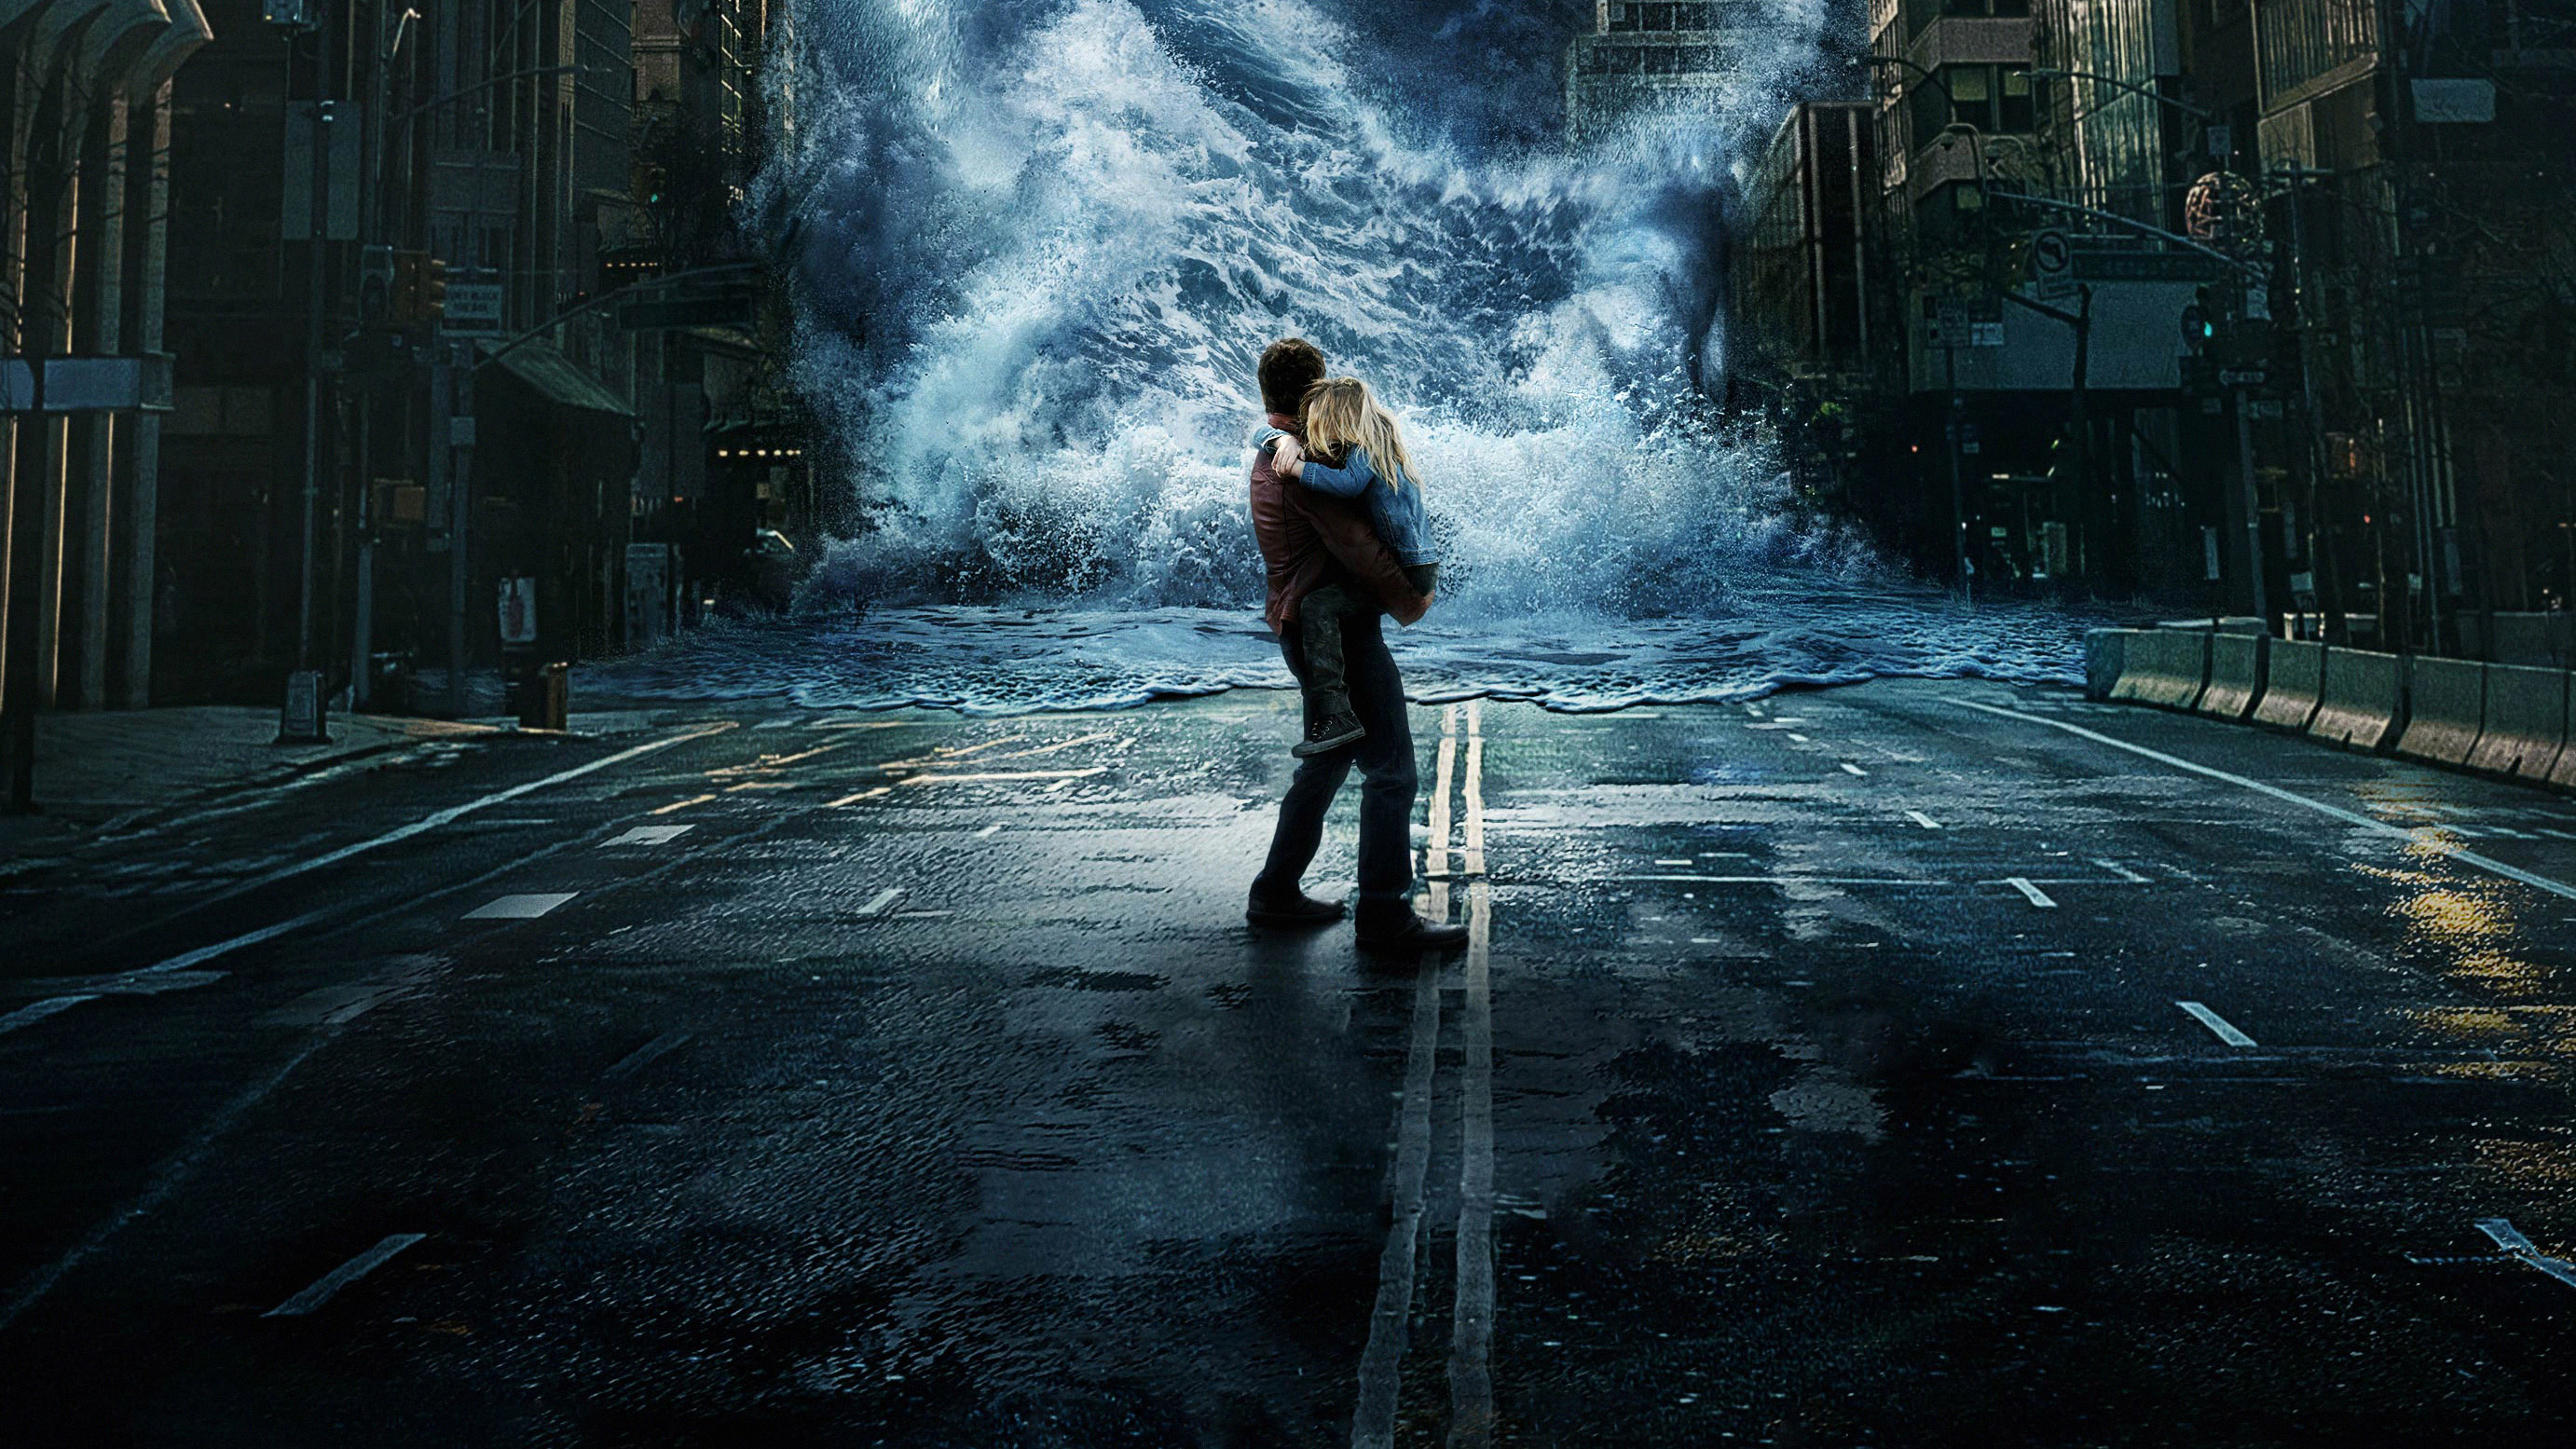 Geostorm 2017 Movie Wallpaper, HD Movies 4K Wallpapers, Images, Photos